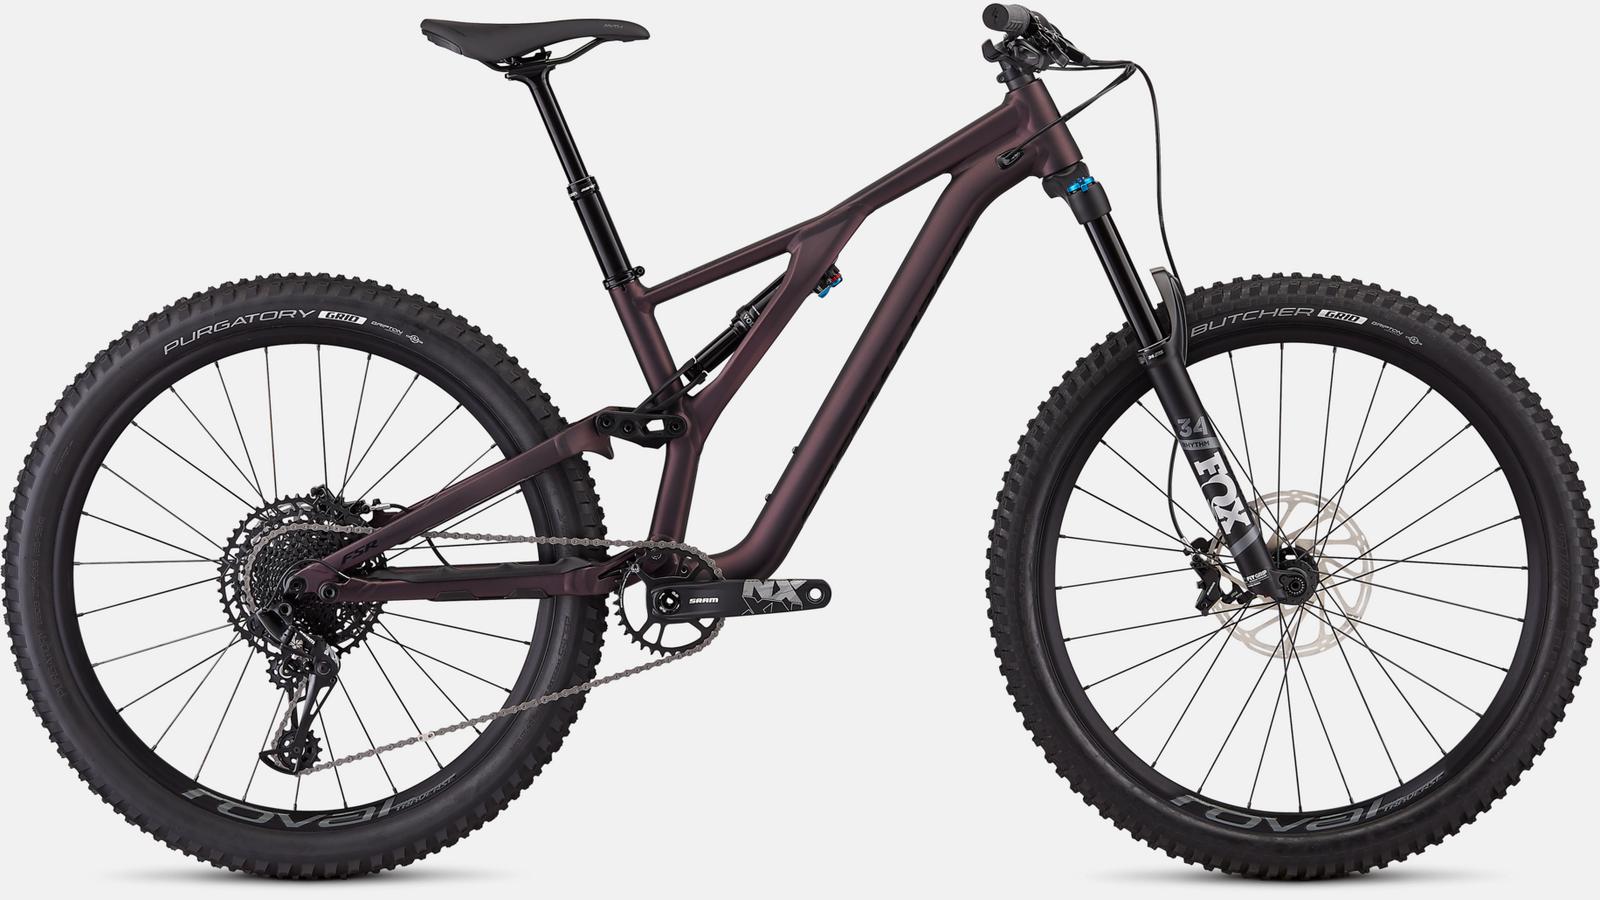 Paint for 2019 Specialized Women's Stumpjumper Comp 27.5 12-speed - Satin Cast Berry